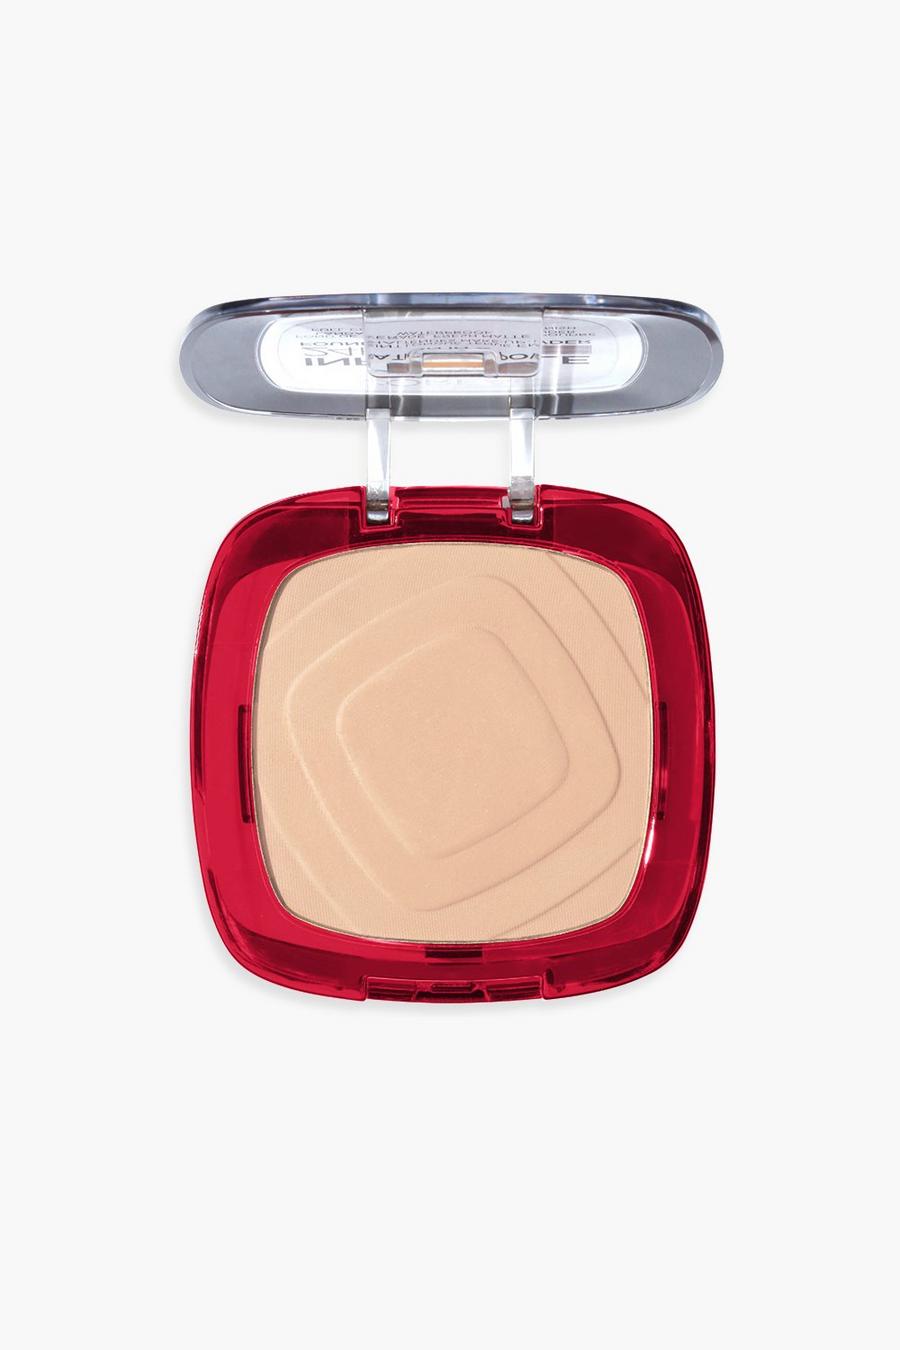 L'Oréal Paris Infallible 24H Fresh Wear Foundation in a Powder, Shade 20 Ivory image number 1